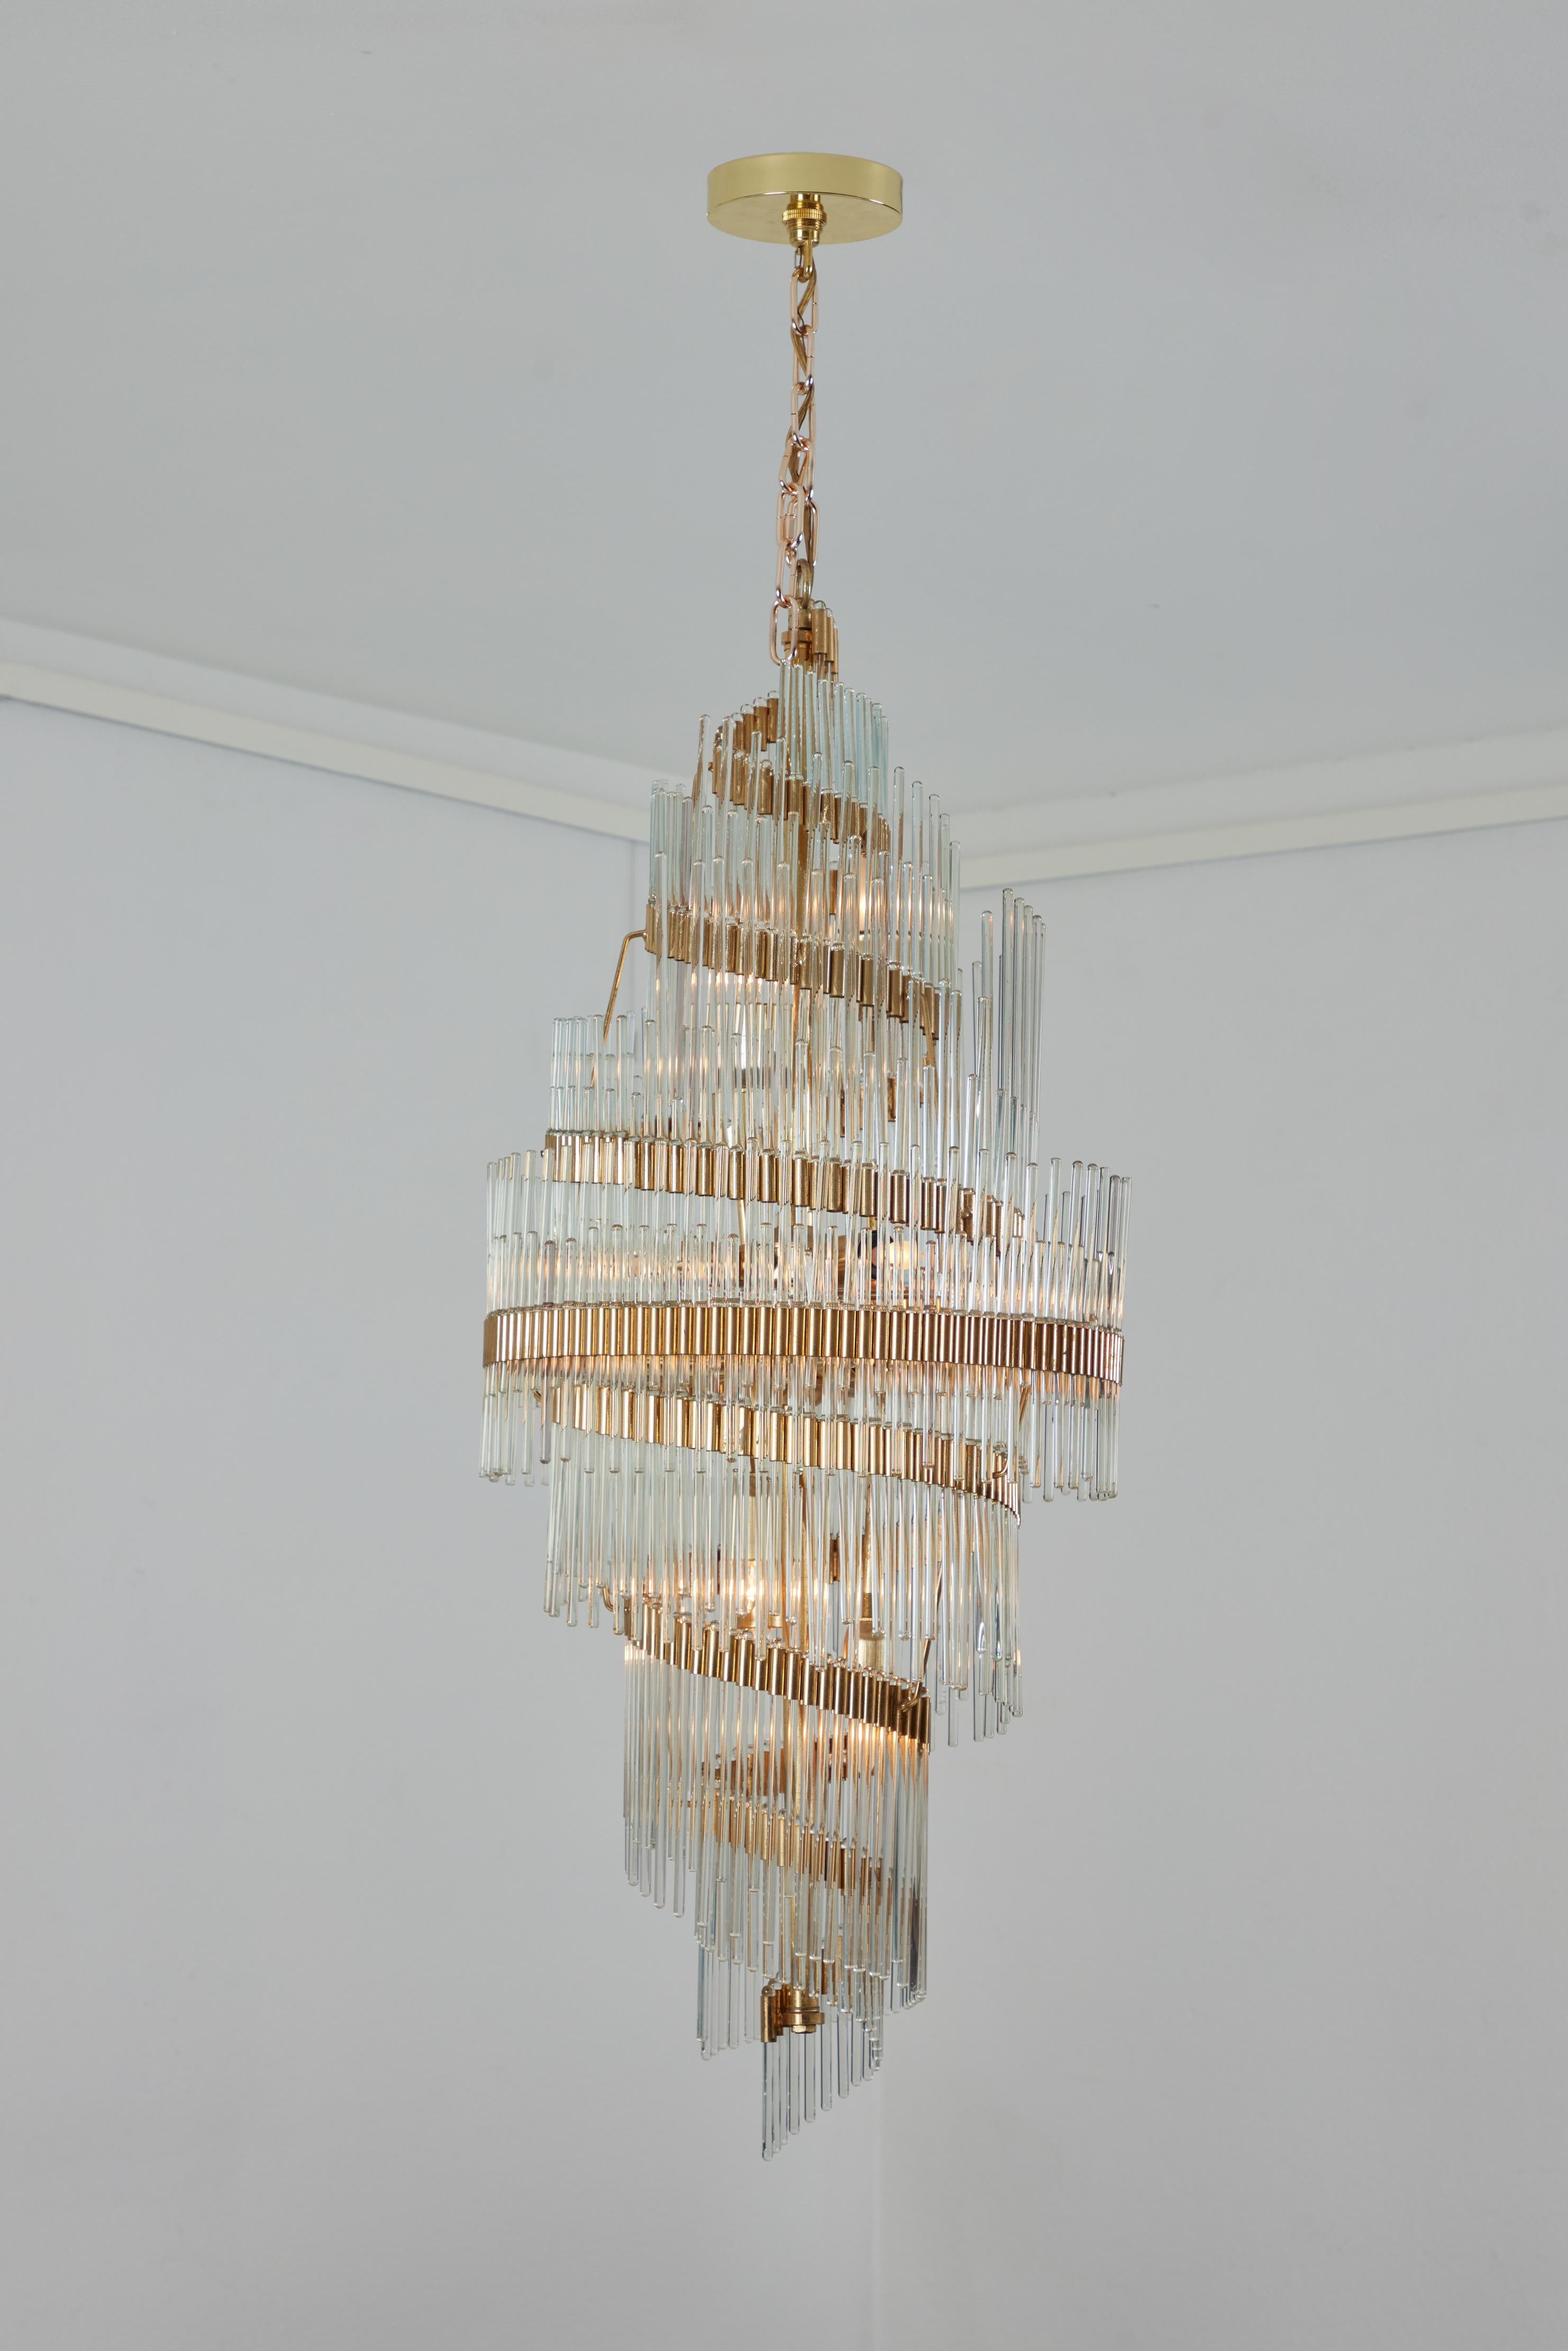 This chandelier with glass rods attributed to Gaetano Sciolari is an elegant and graceful statement with it's swirling rods and gold frame.  The frame is less wide at the top and bottom and widest around the middle, giving a seamlessly swirl like